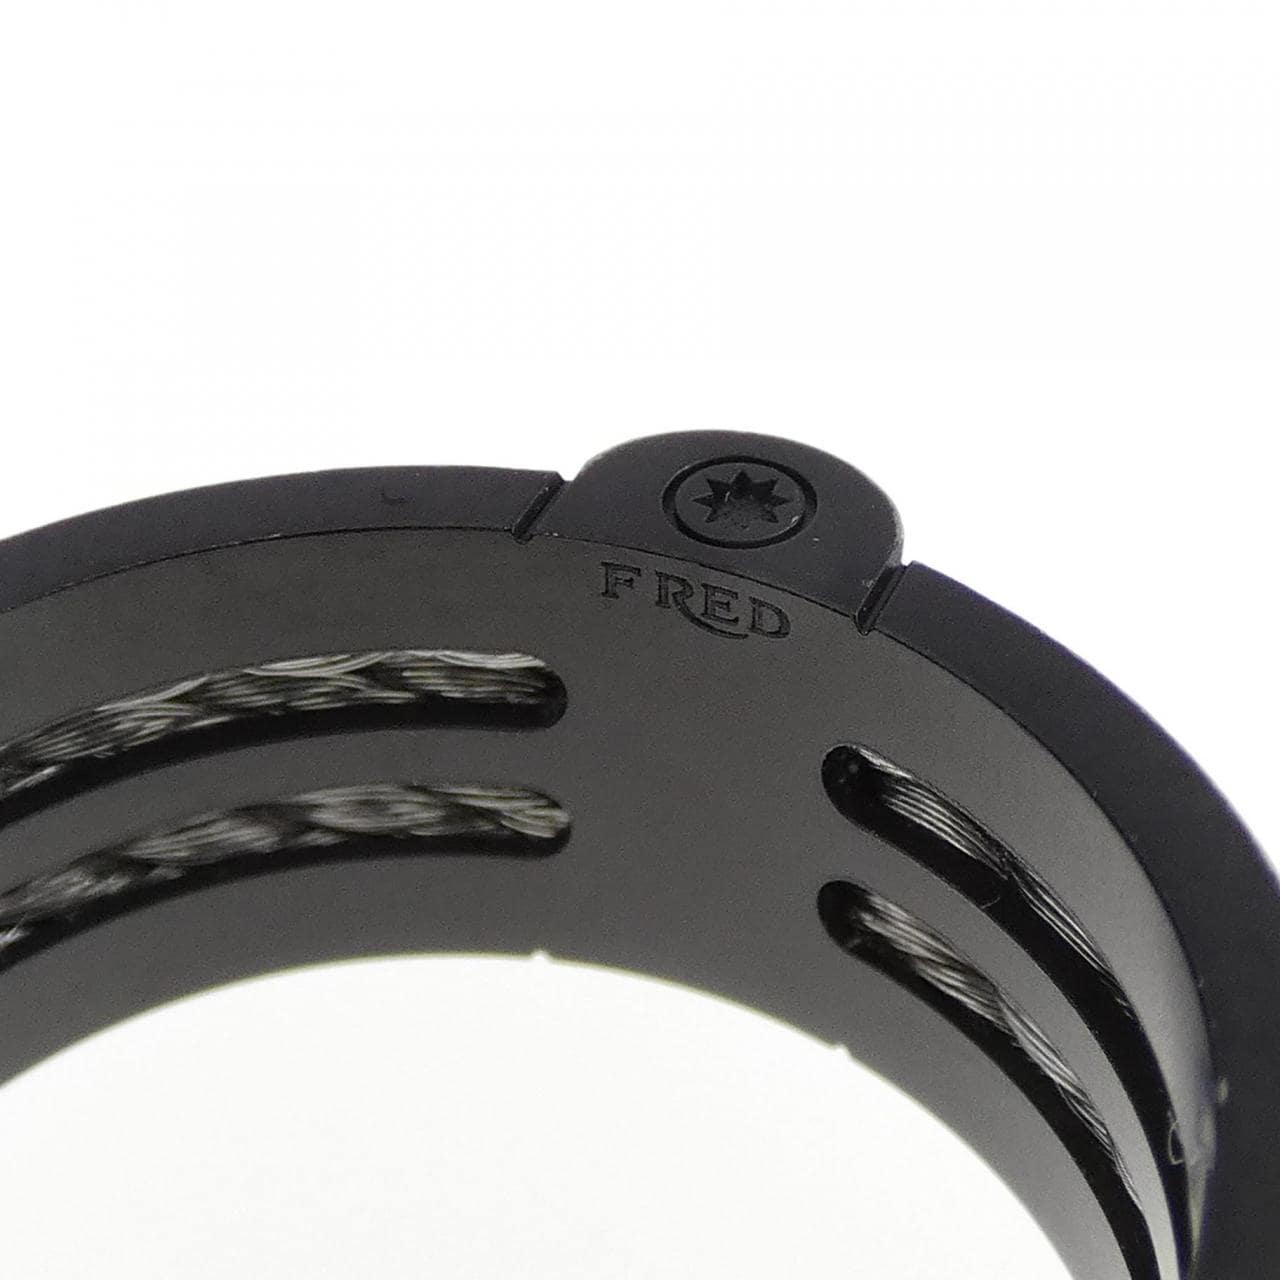 FRED force 10 winch ring